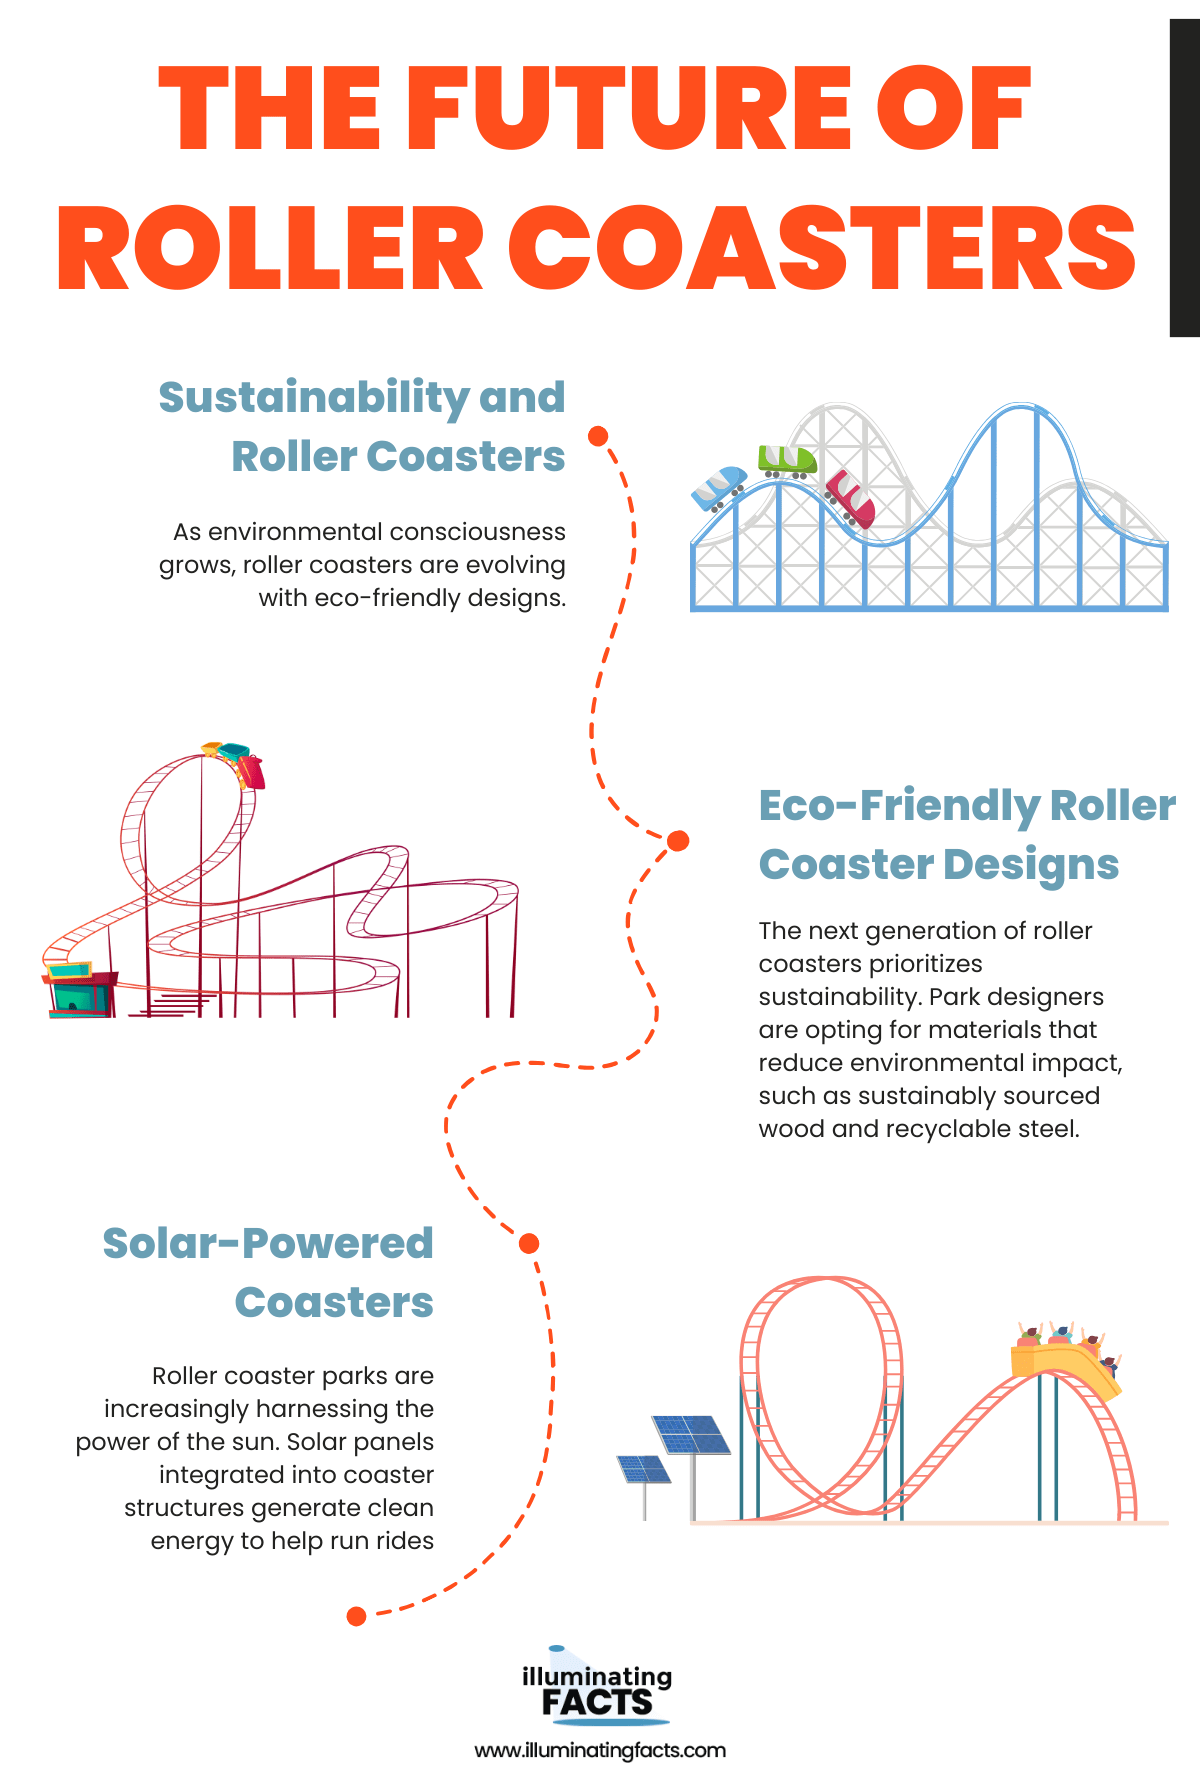 The Future of Roller Coasters